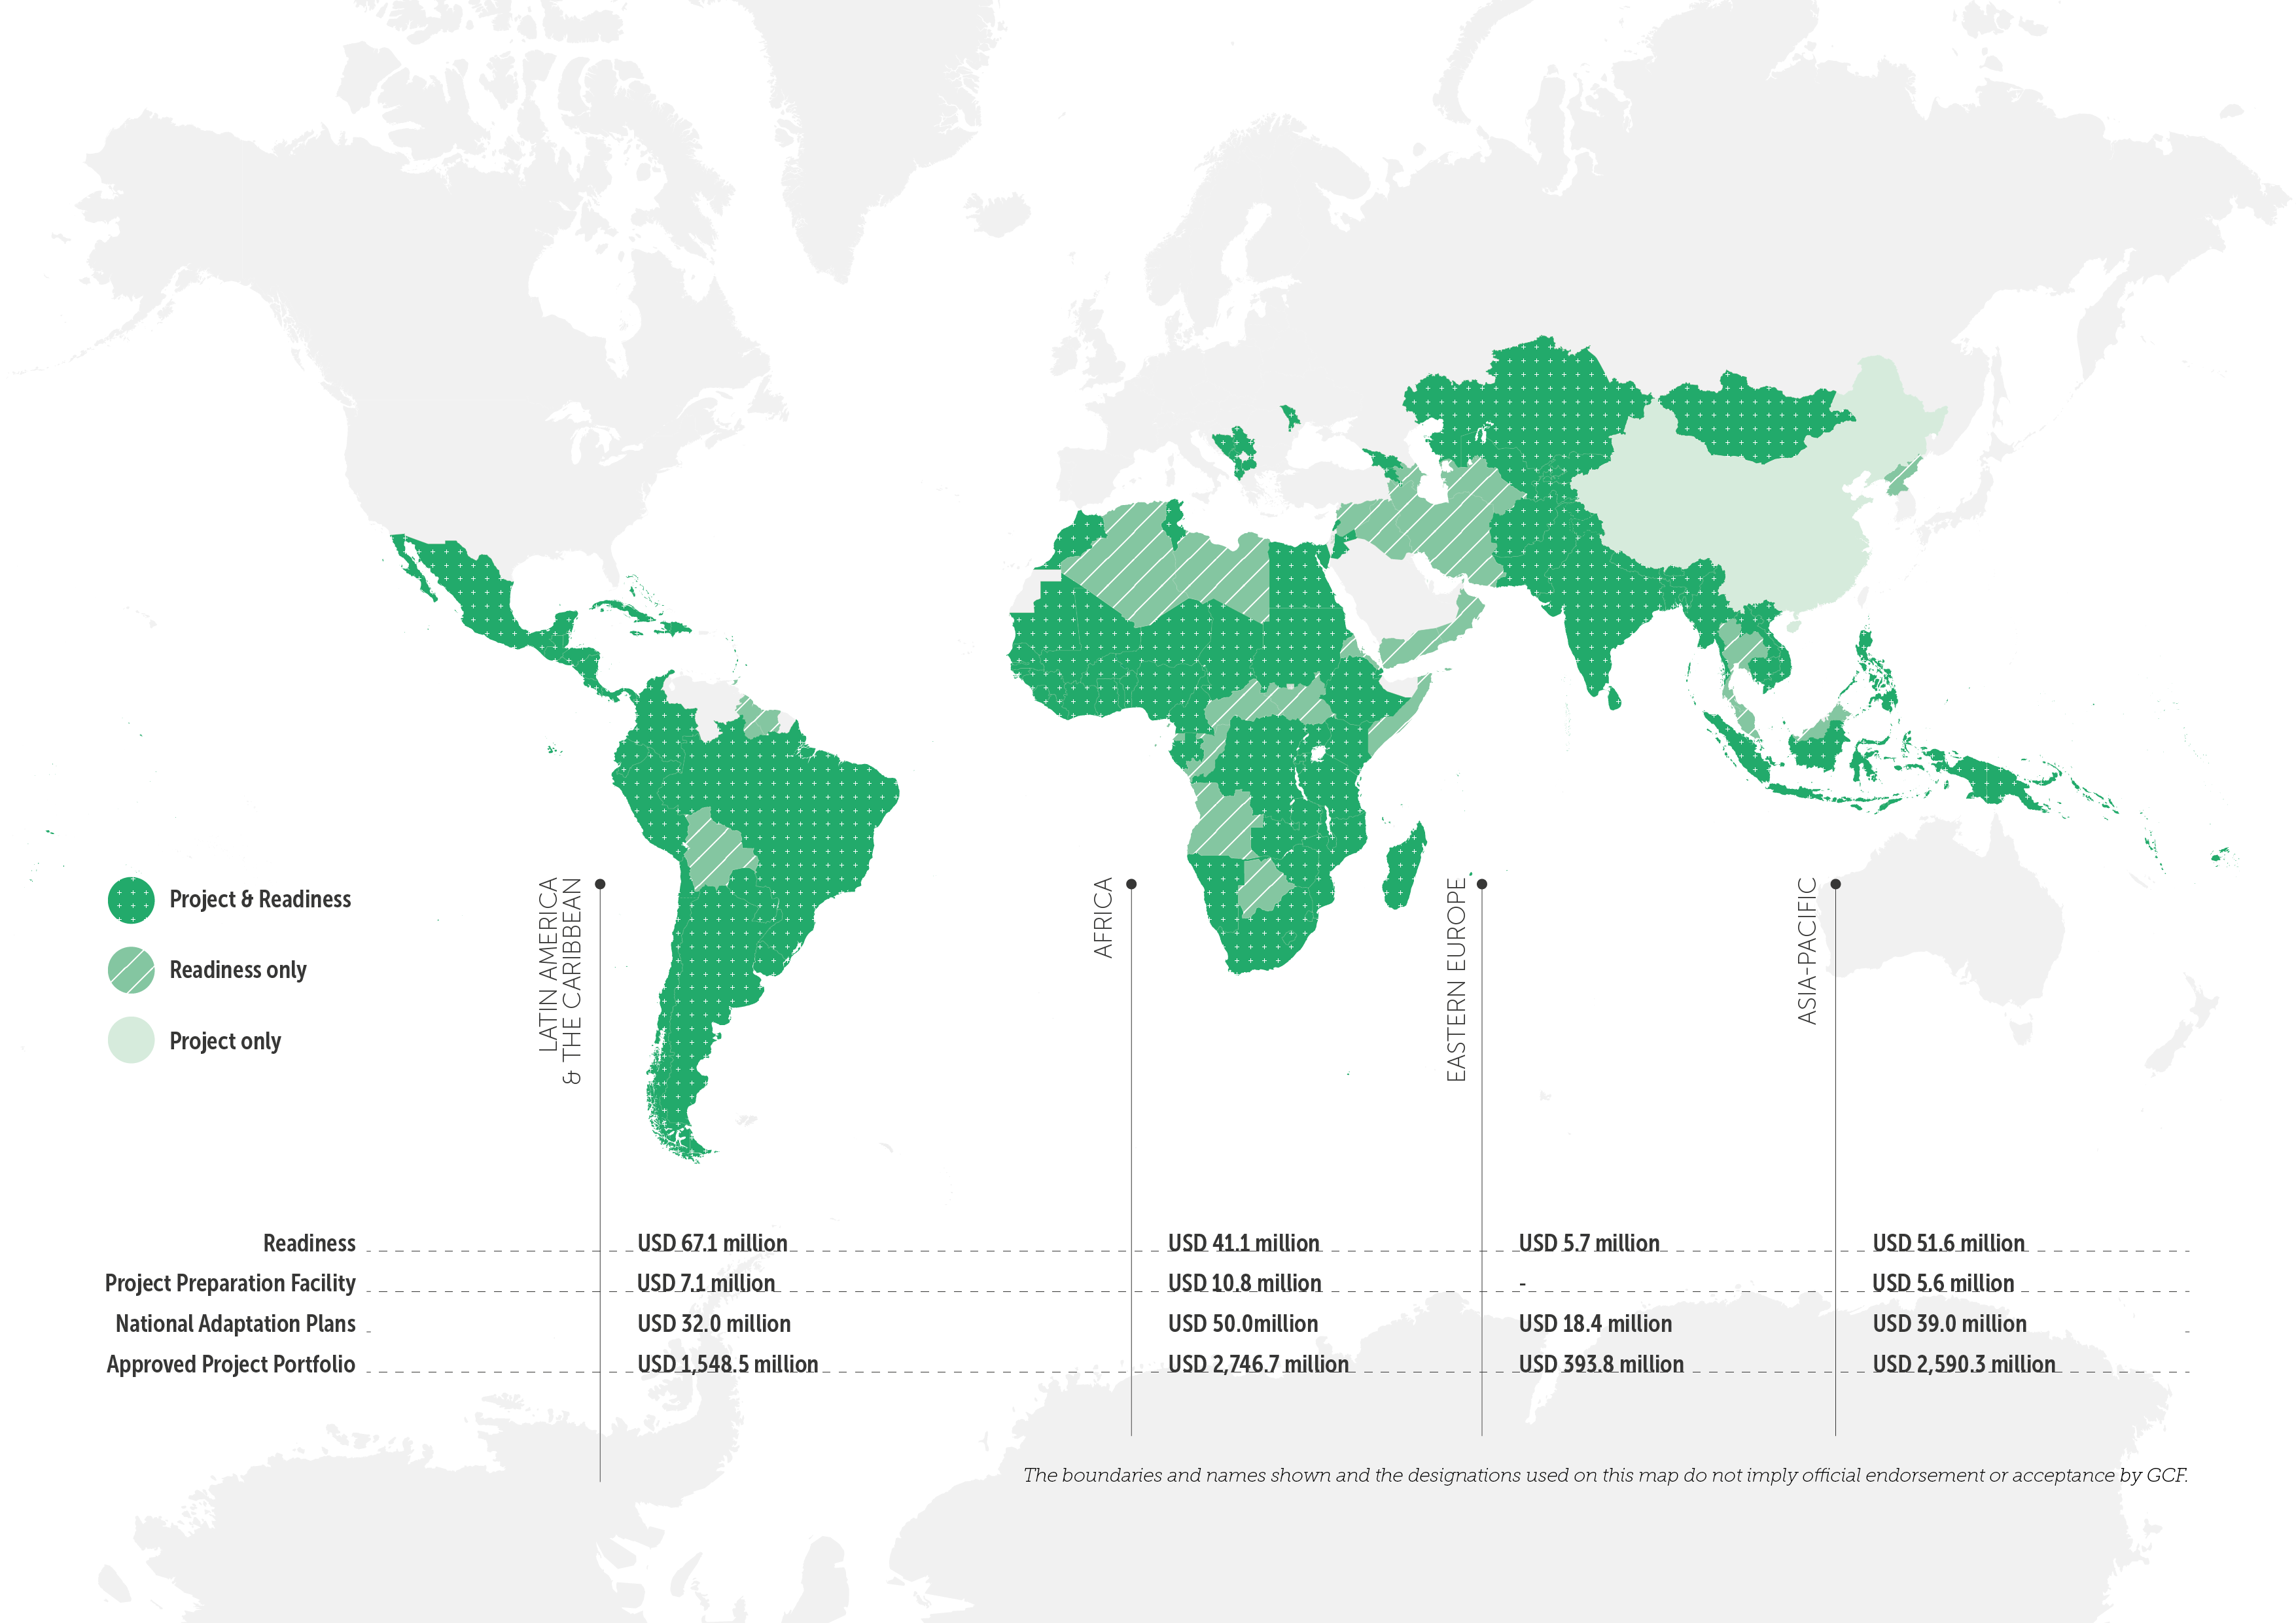 Geographic distribution of GCF projects